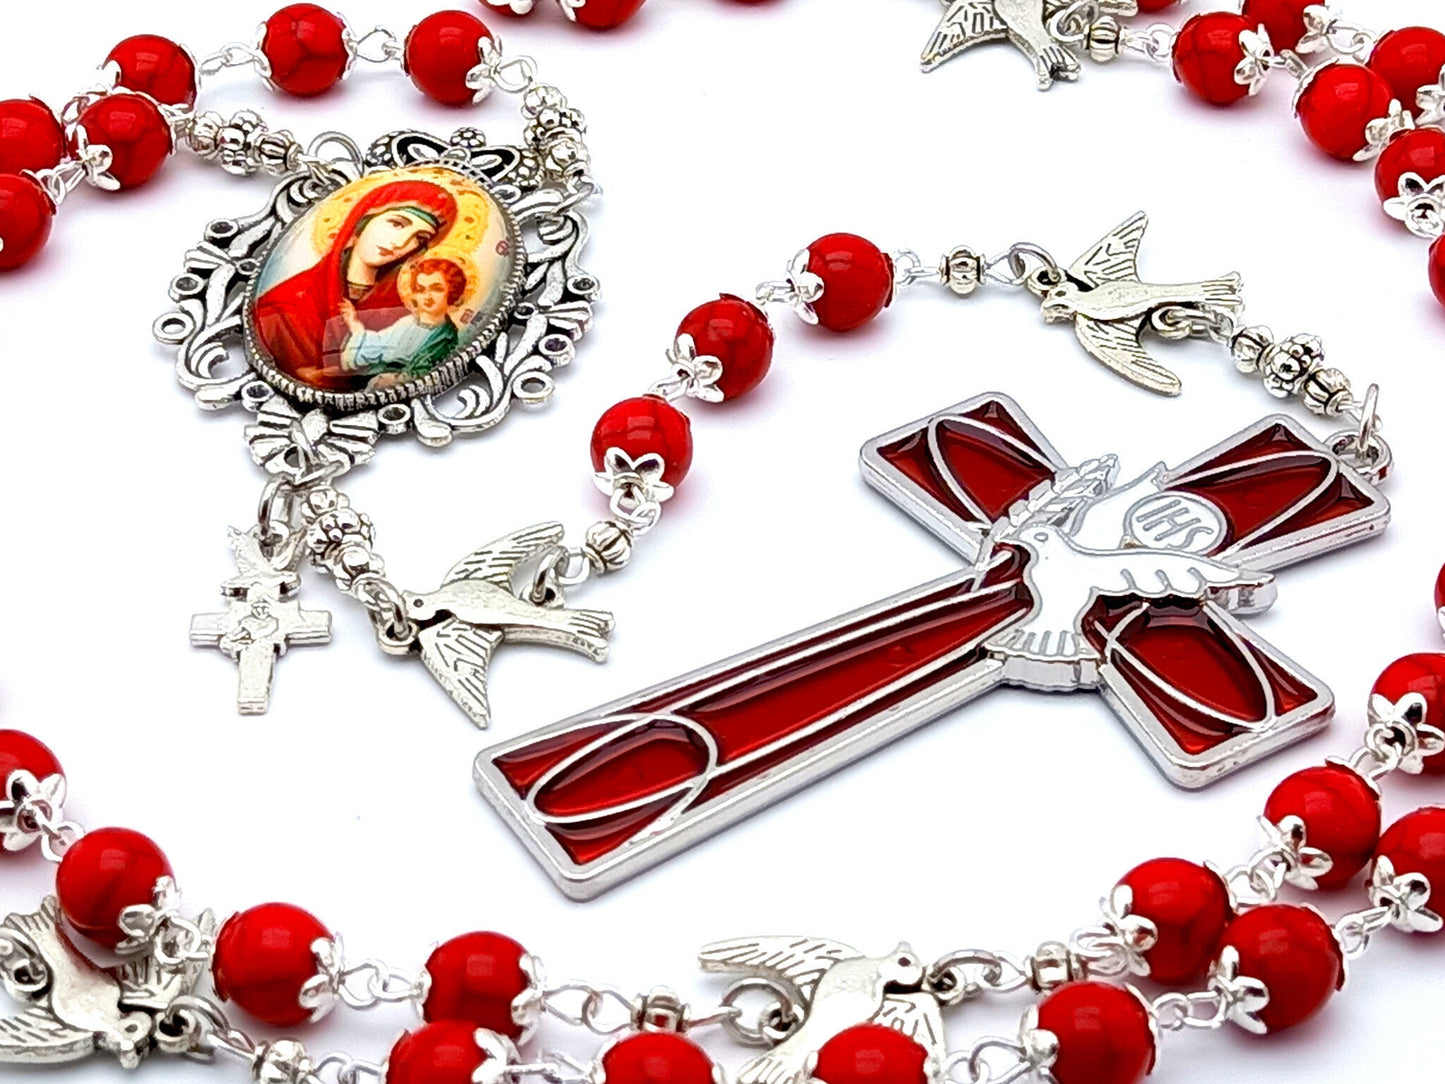 Our Lady of Perpetual Help unique rosary beads with red gemstone beads, silver and red enamel dove crucifix, silver dove pater beads and picture centre medal.